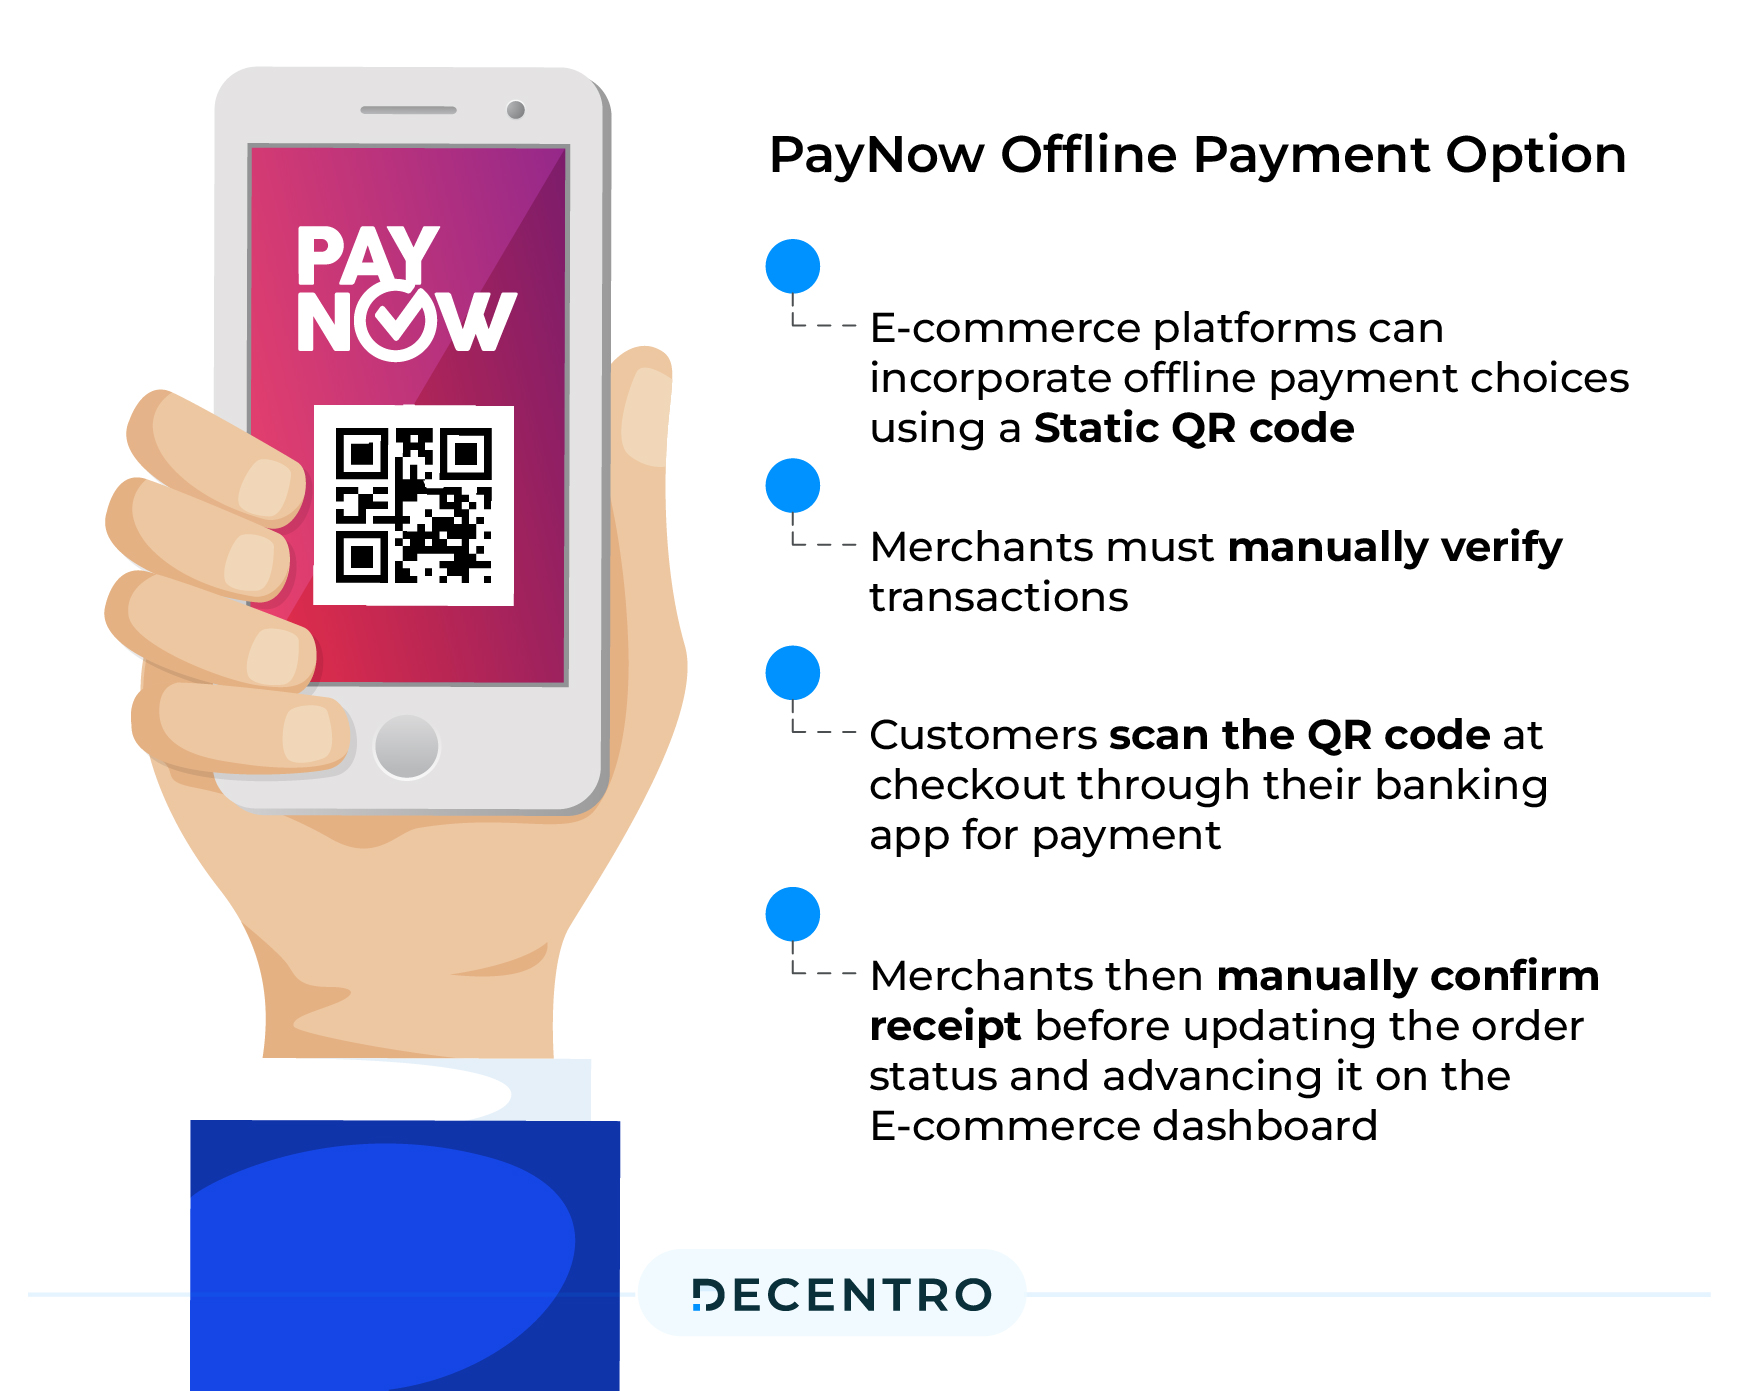 PayNow Offline Payment Option